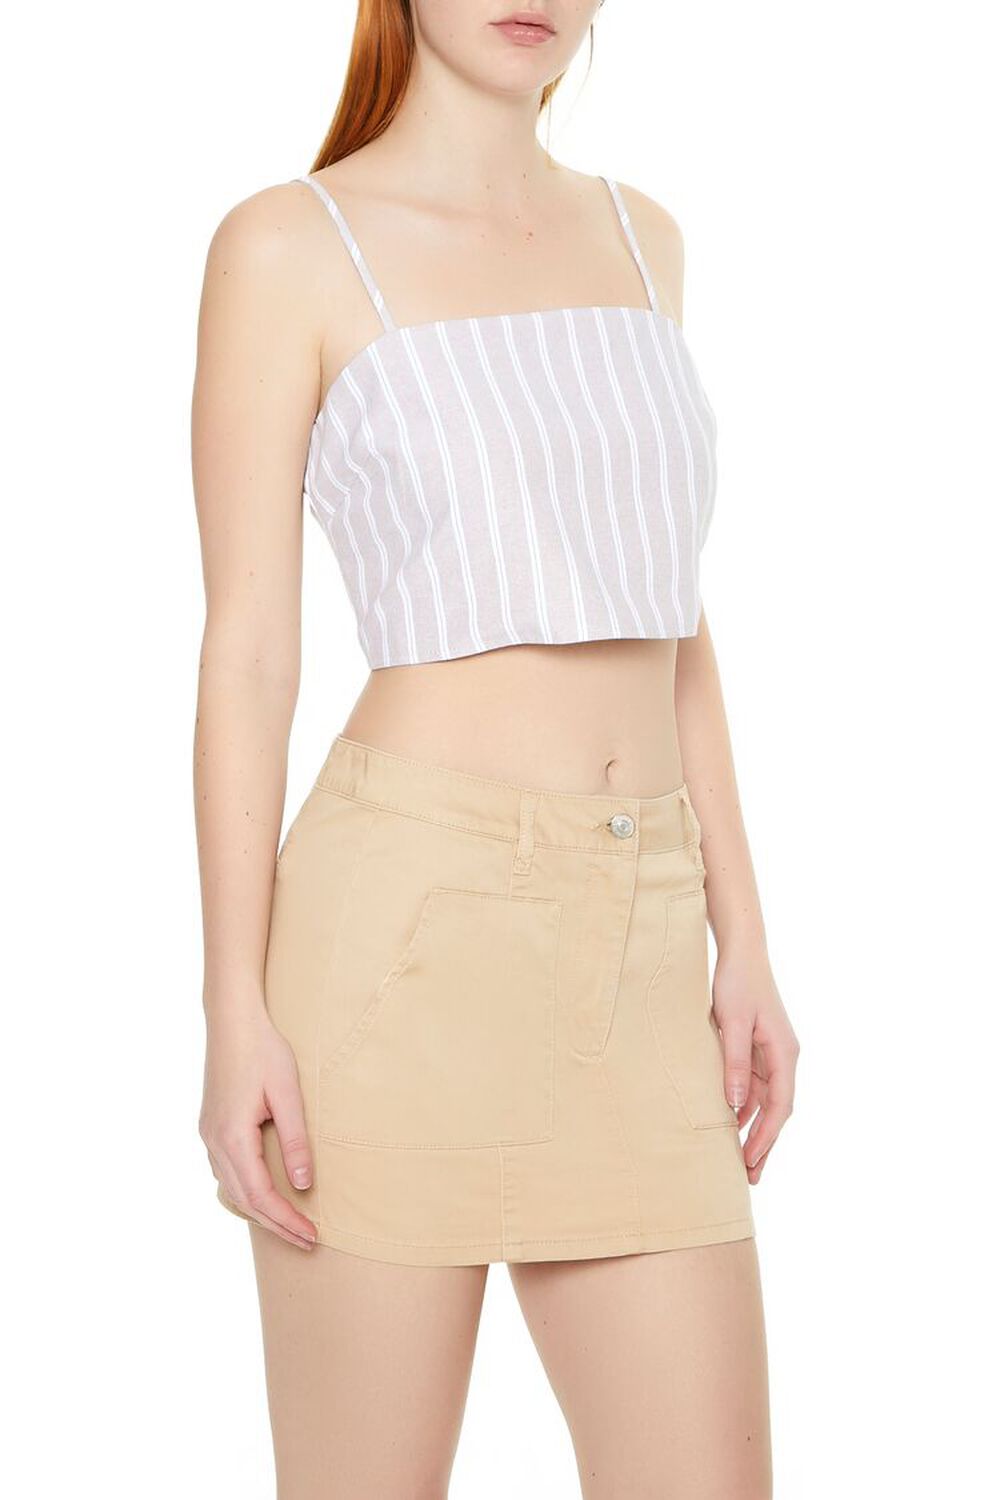 GREY/WHITE Striped Cropped Cami, image 2